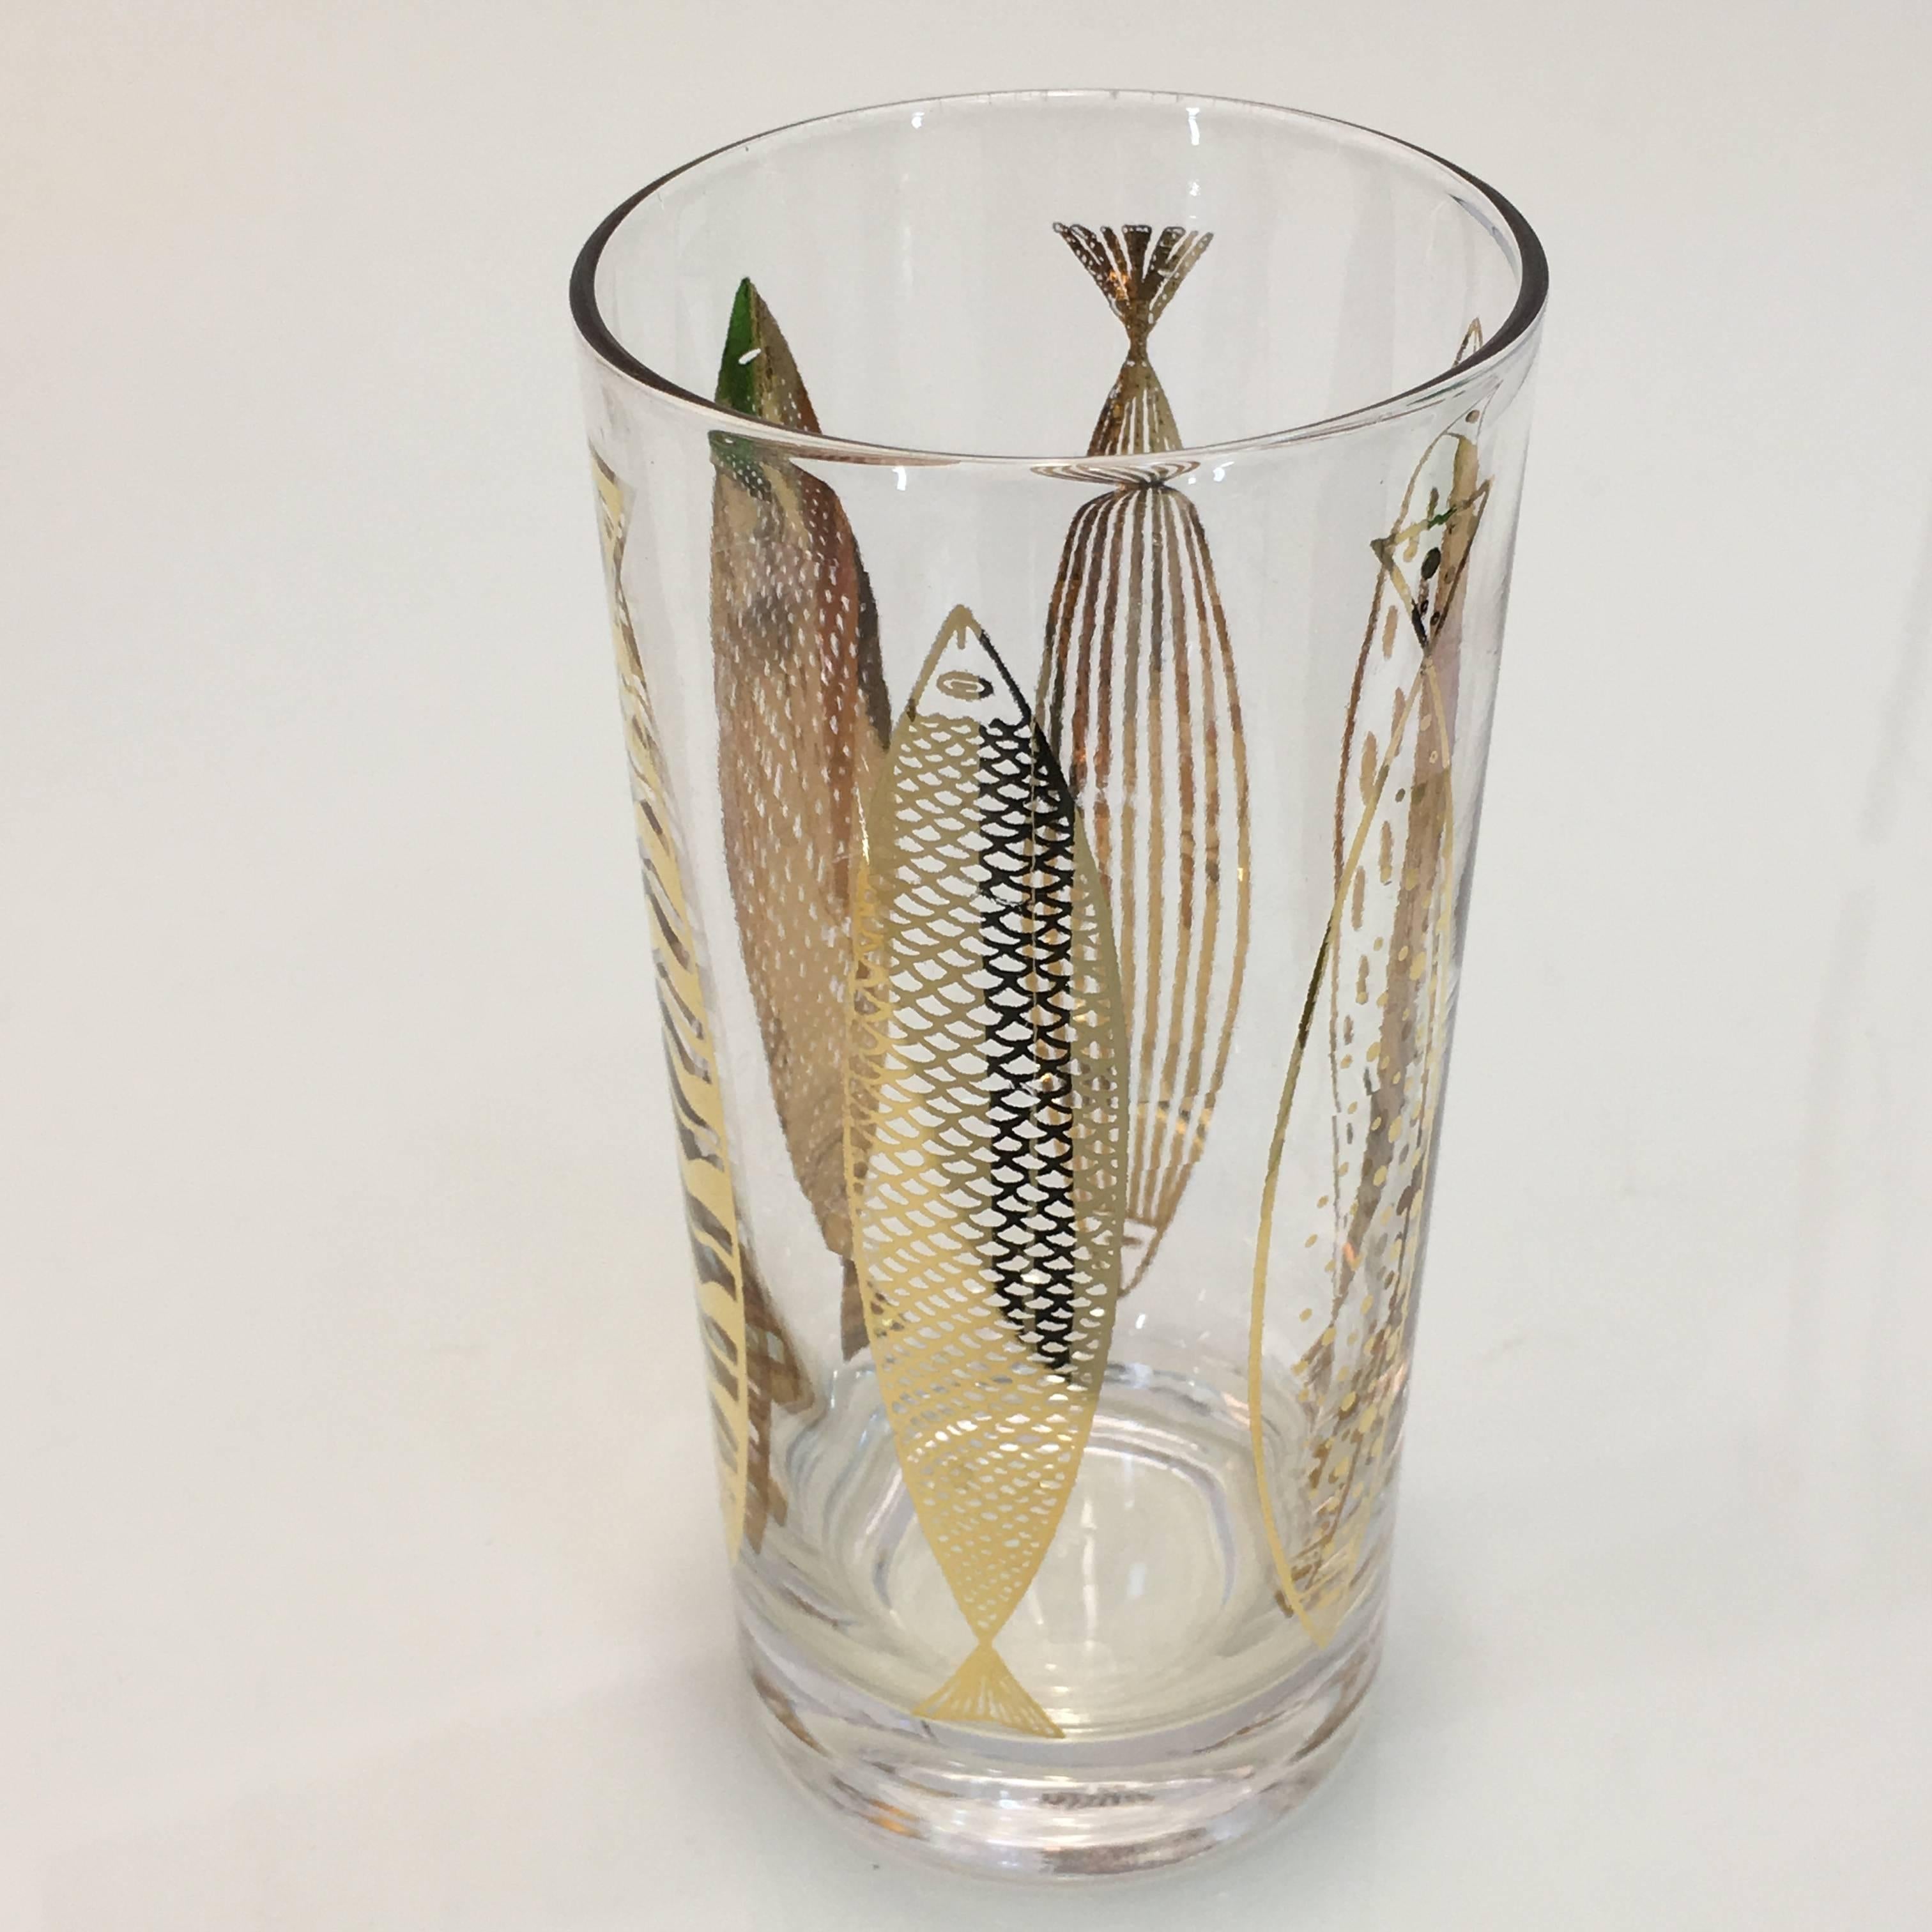 True Mid-Century Modern barware set of eight glasses by Fred Press and signed to each glass. Features gold impressed abstract fish motif to the glasses. They are in excellent condition with minimal loss of gold.

Each measures 2.75